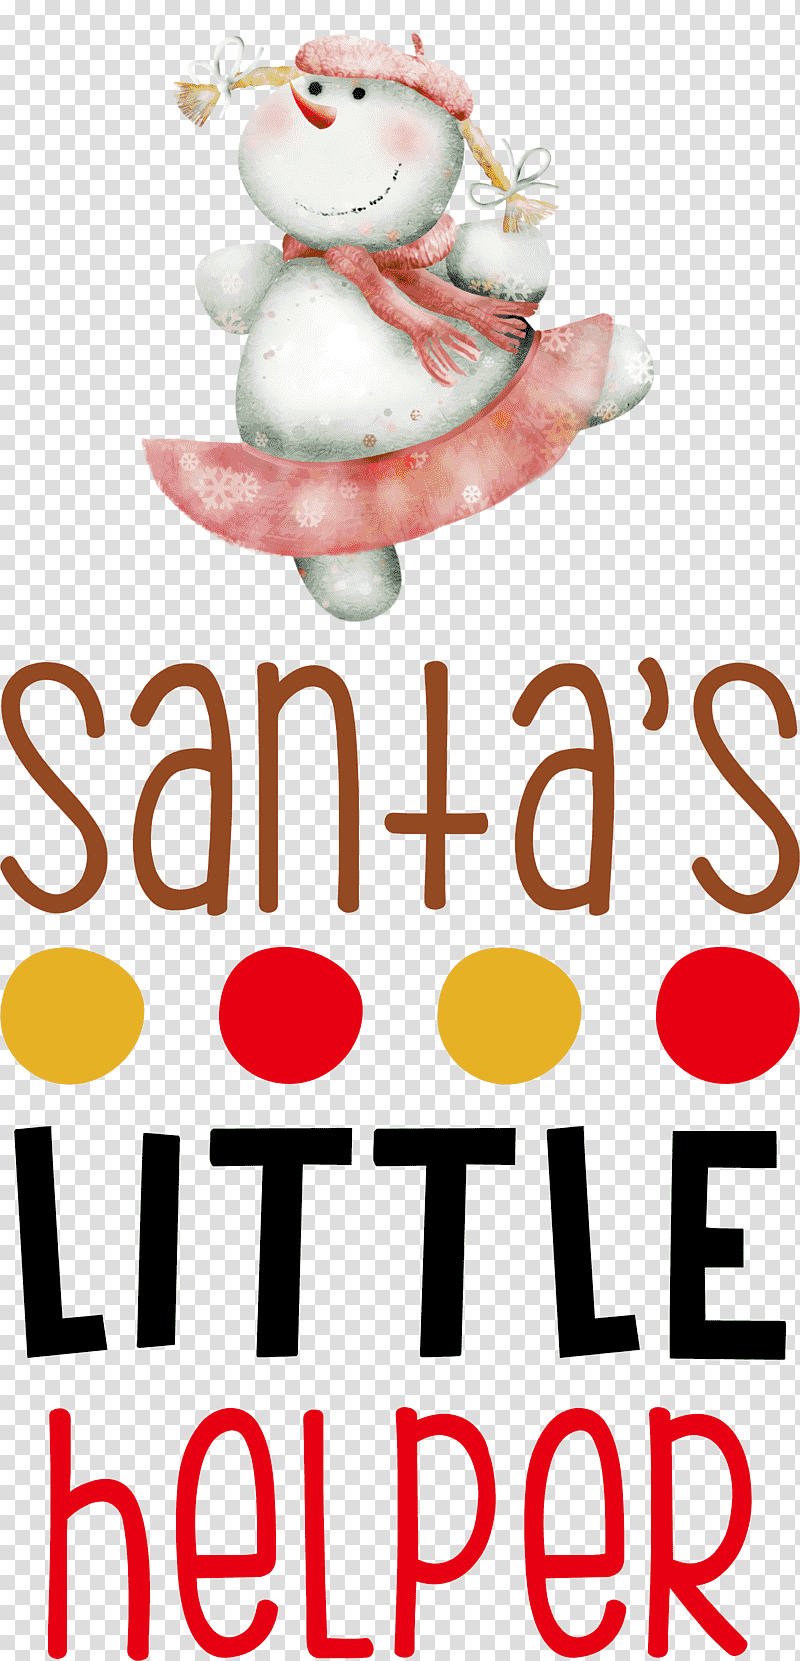 Santas little helper Santa, Character, Meter, Christmas Day, Happiness, Character Created By transparent background PNG clipart